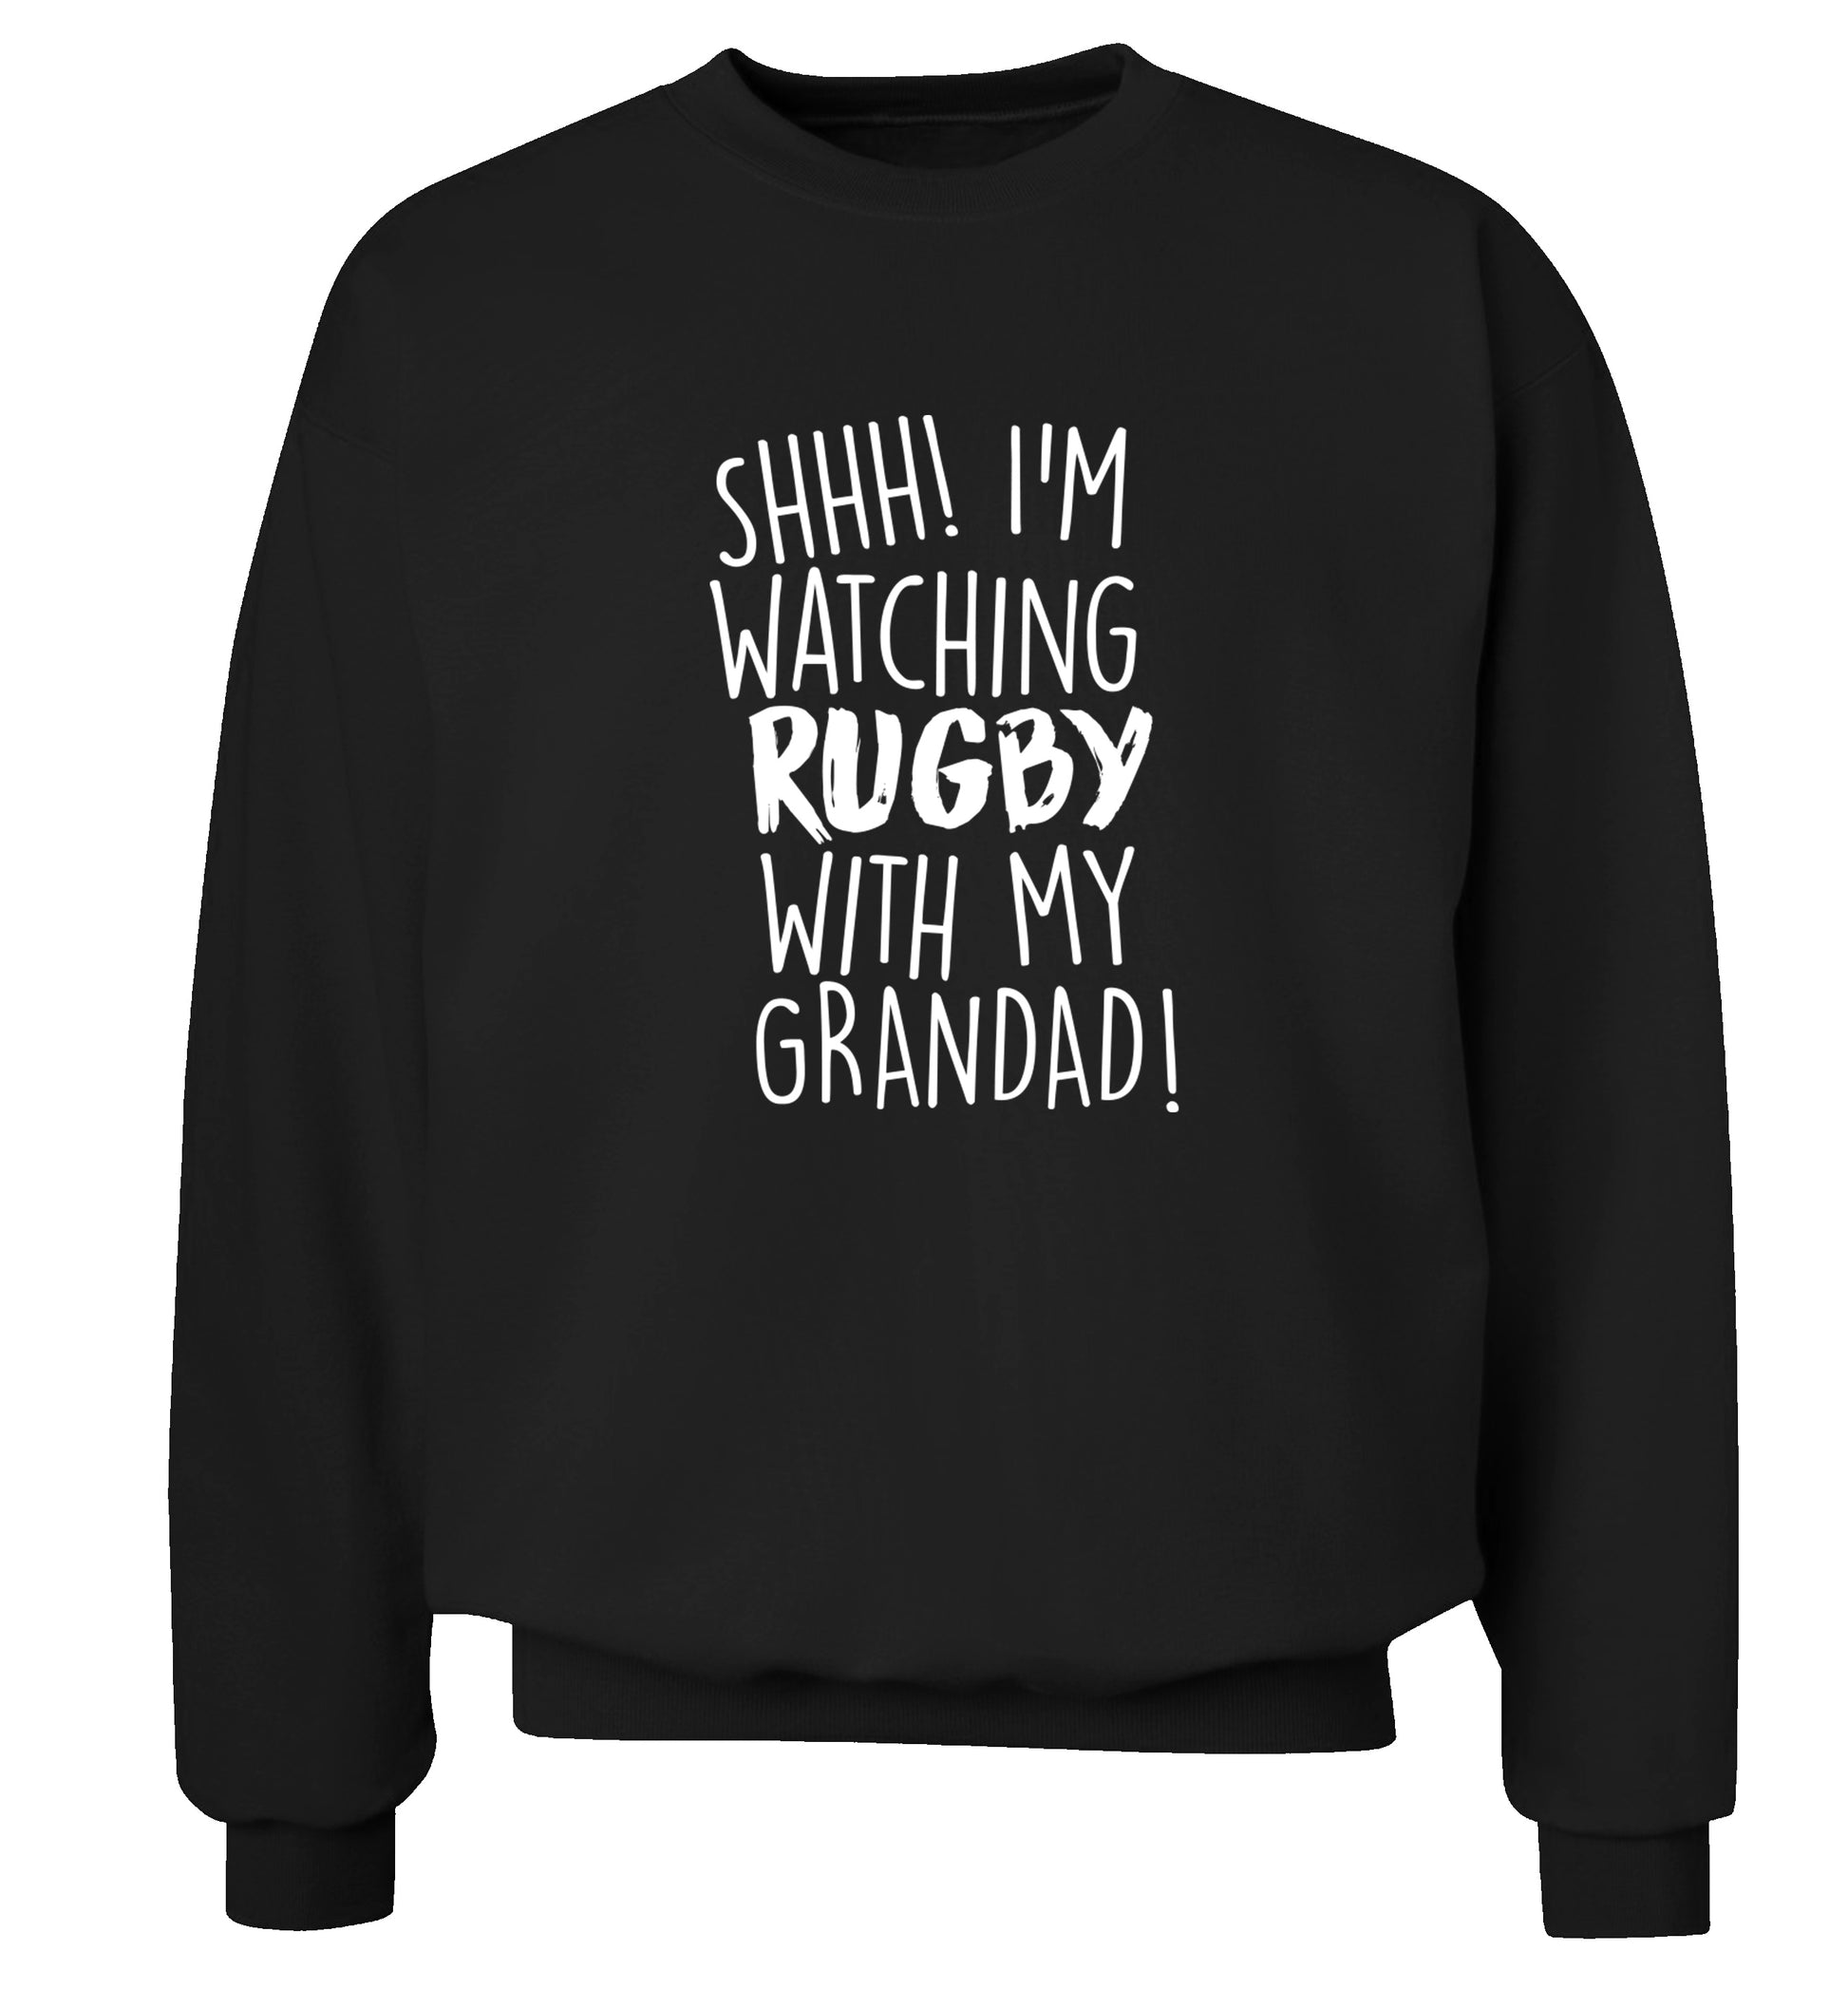 Shh I'm watching rugby with my grandaughter Adult's unisex black Sweater 2XL